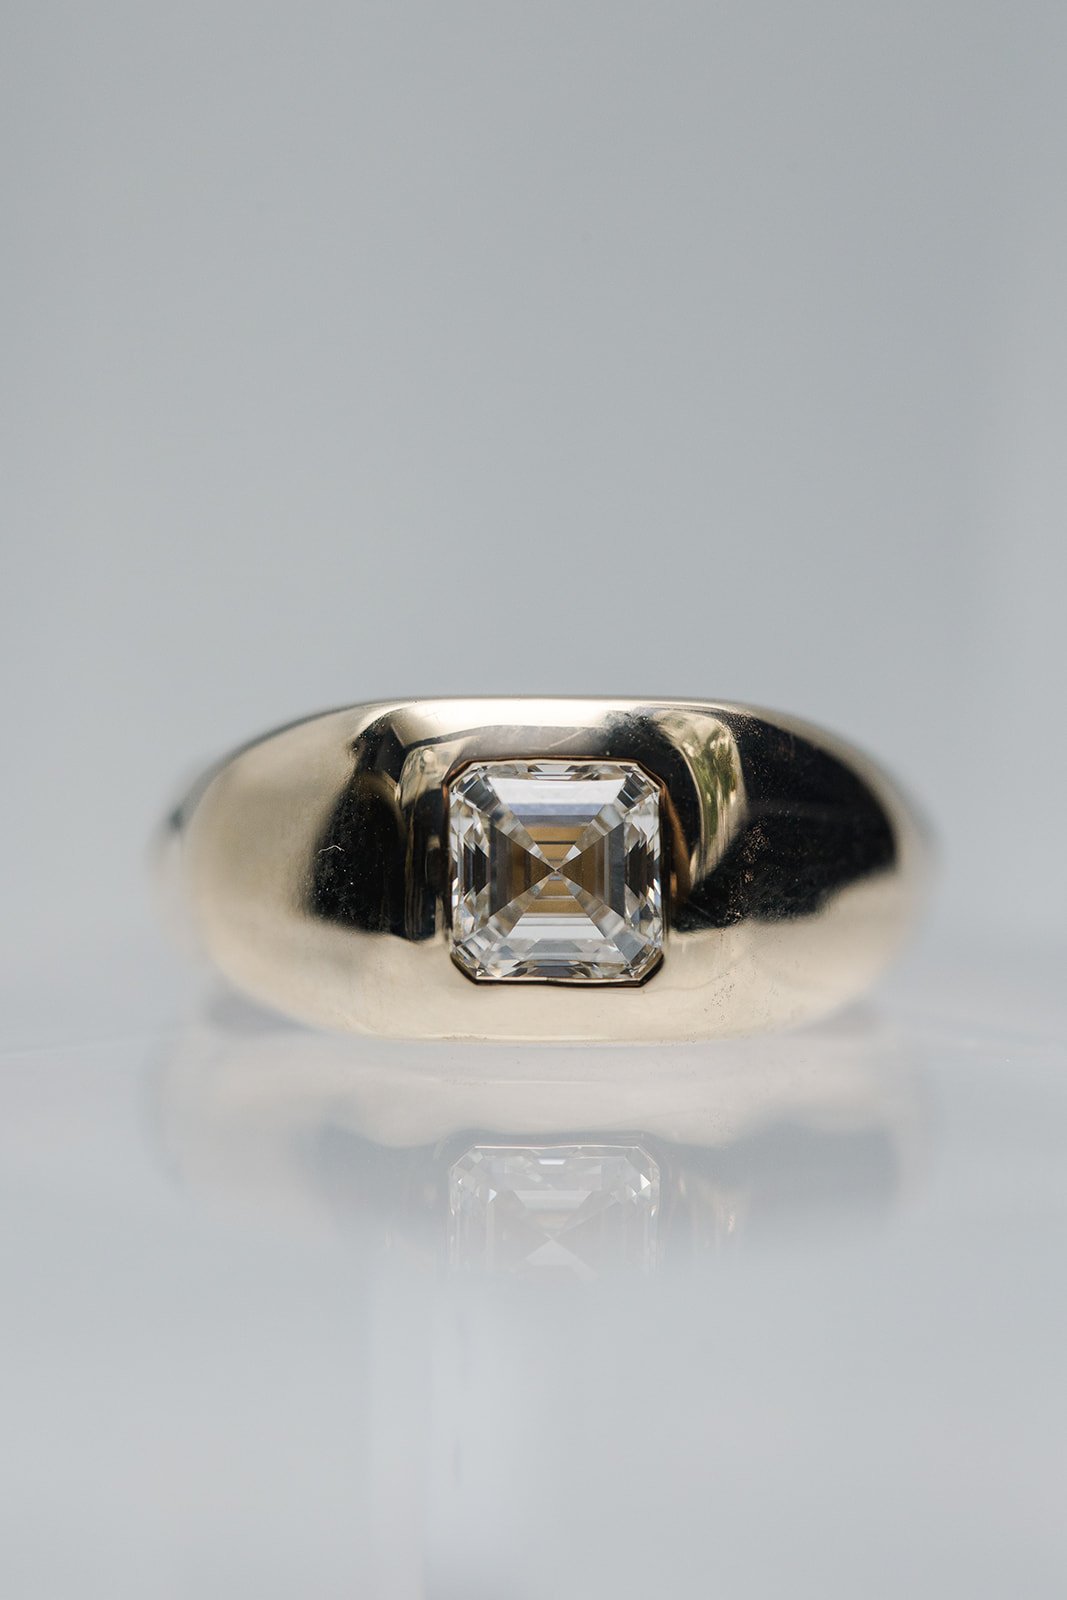 Alexandria and Company custom designed signet style yellow gold ring with Asscher cut diamond